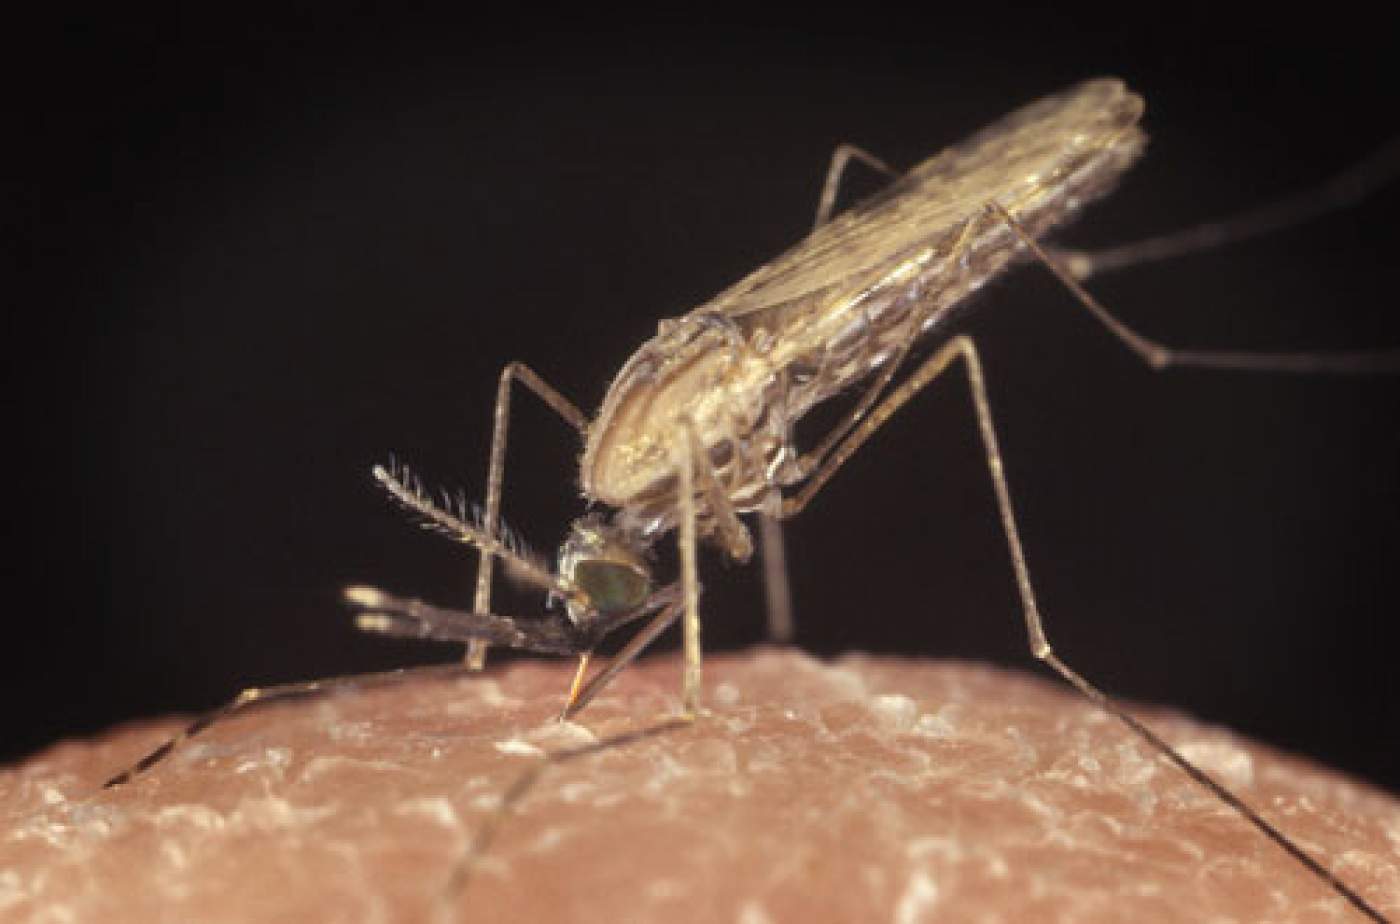 Malaria: The Goods on Bad Air